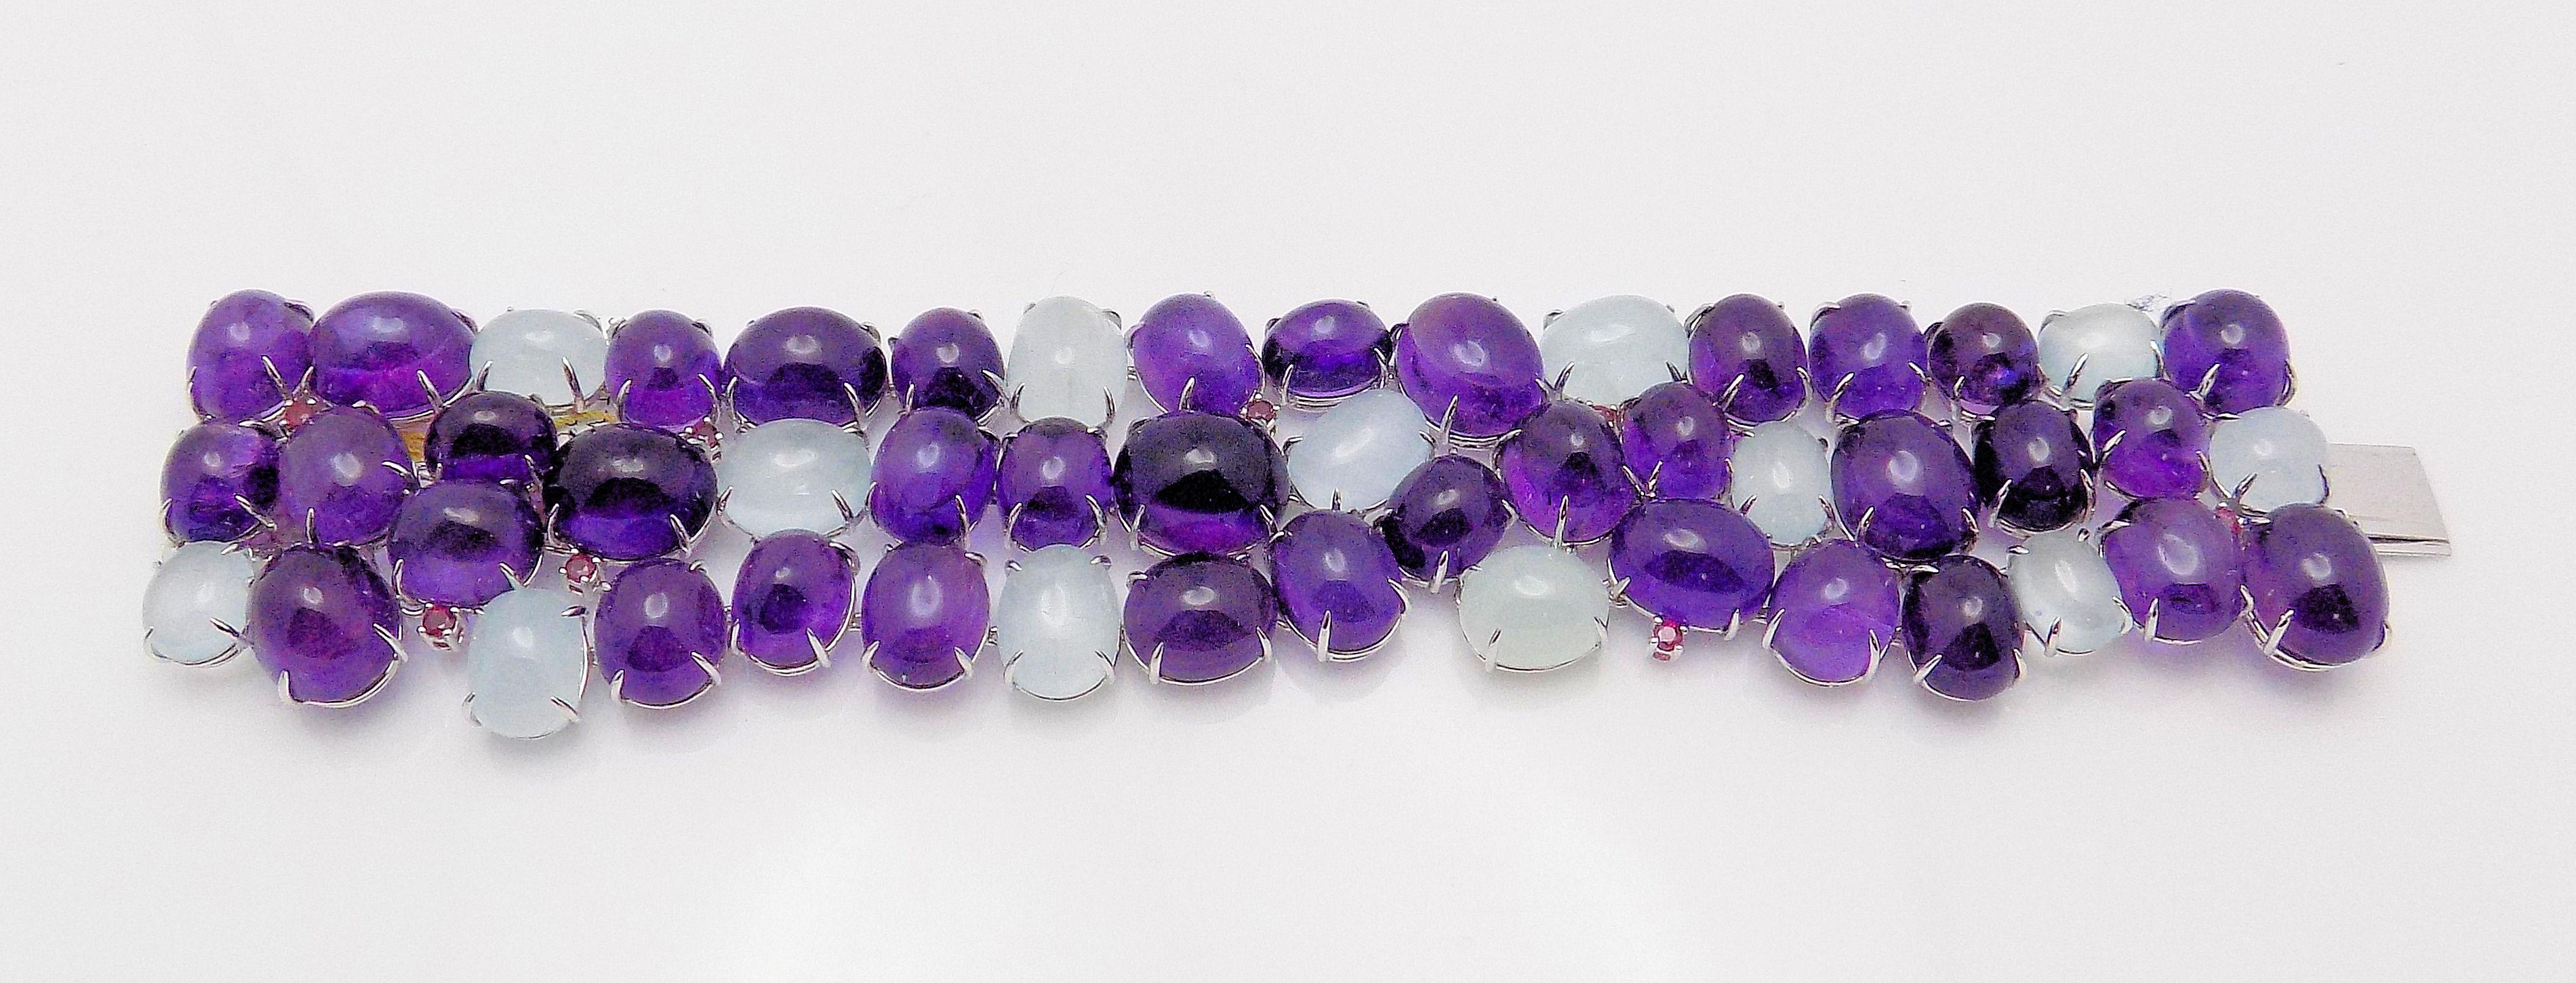 Stunning 18 Karat White Gold Bracelet featuring 37 Oval Cabochon Amethysts; 13 Oval Cabochon Aquamarines 309.43 Carat Total Weight; 8 Round Rubies 0.32 Carat Total Weight; Signed: Z. 66.7 DWT or 103.73 Grams.